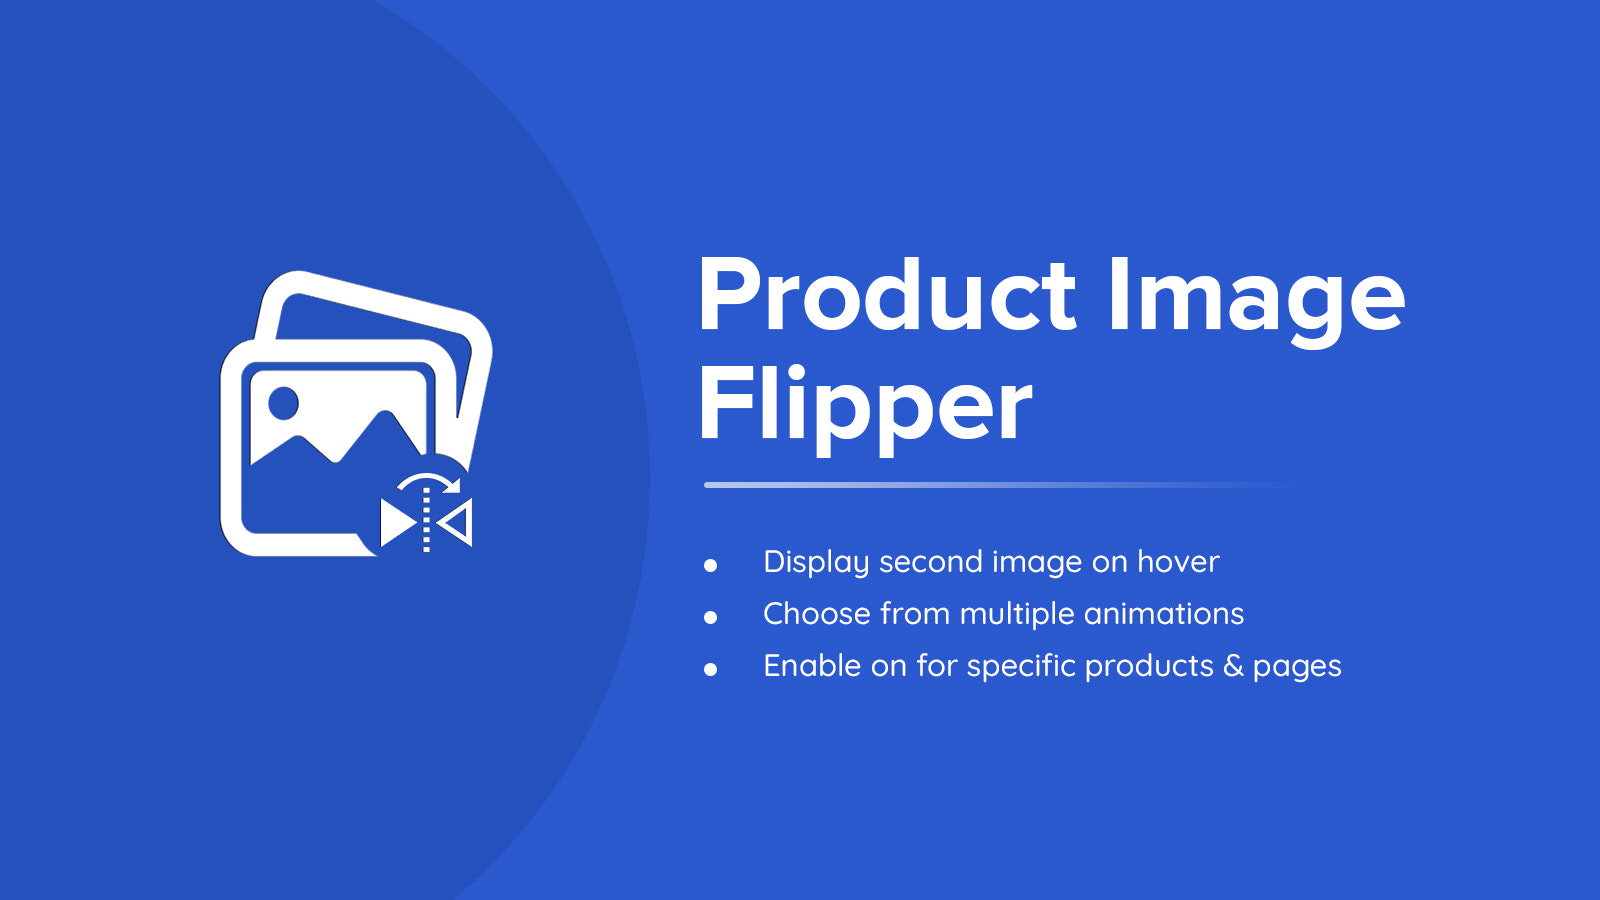 Shopify product image flipper